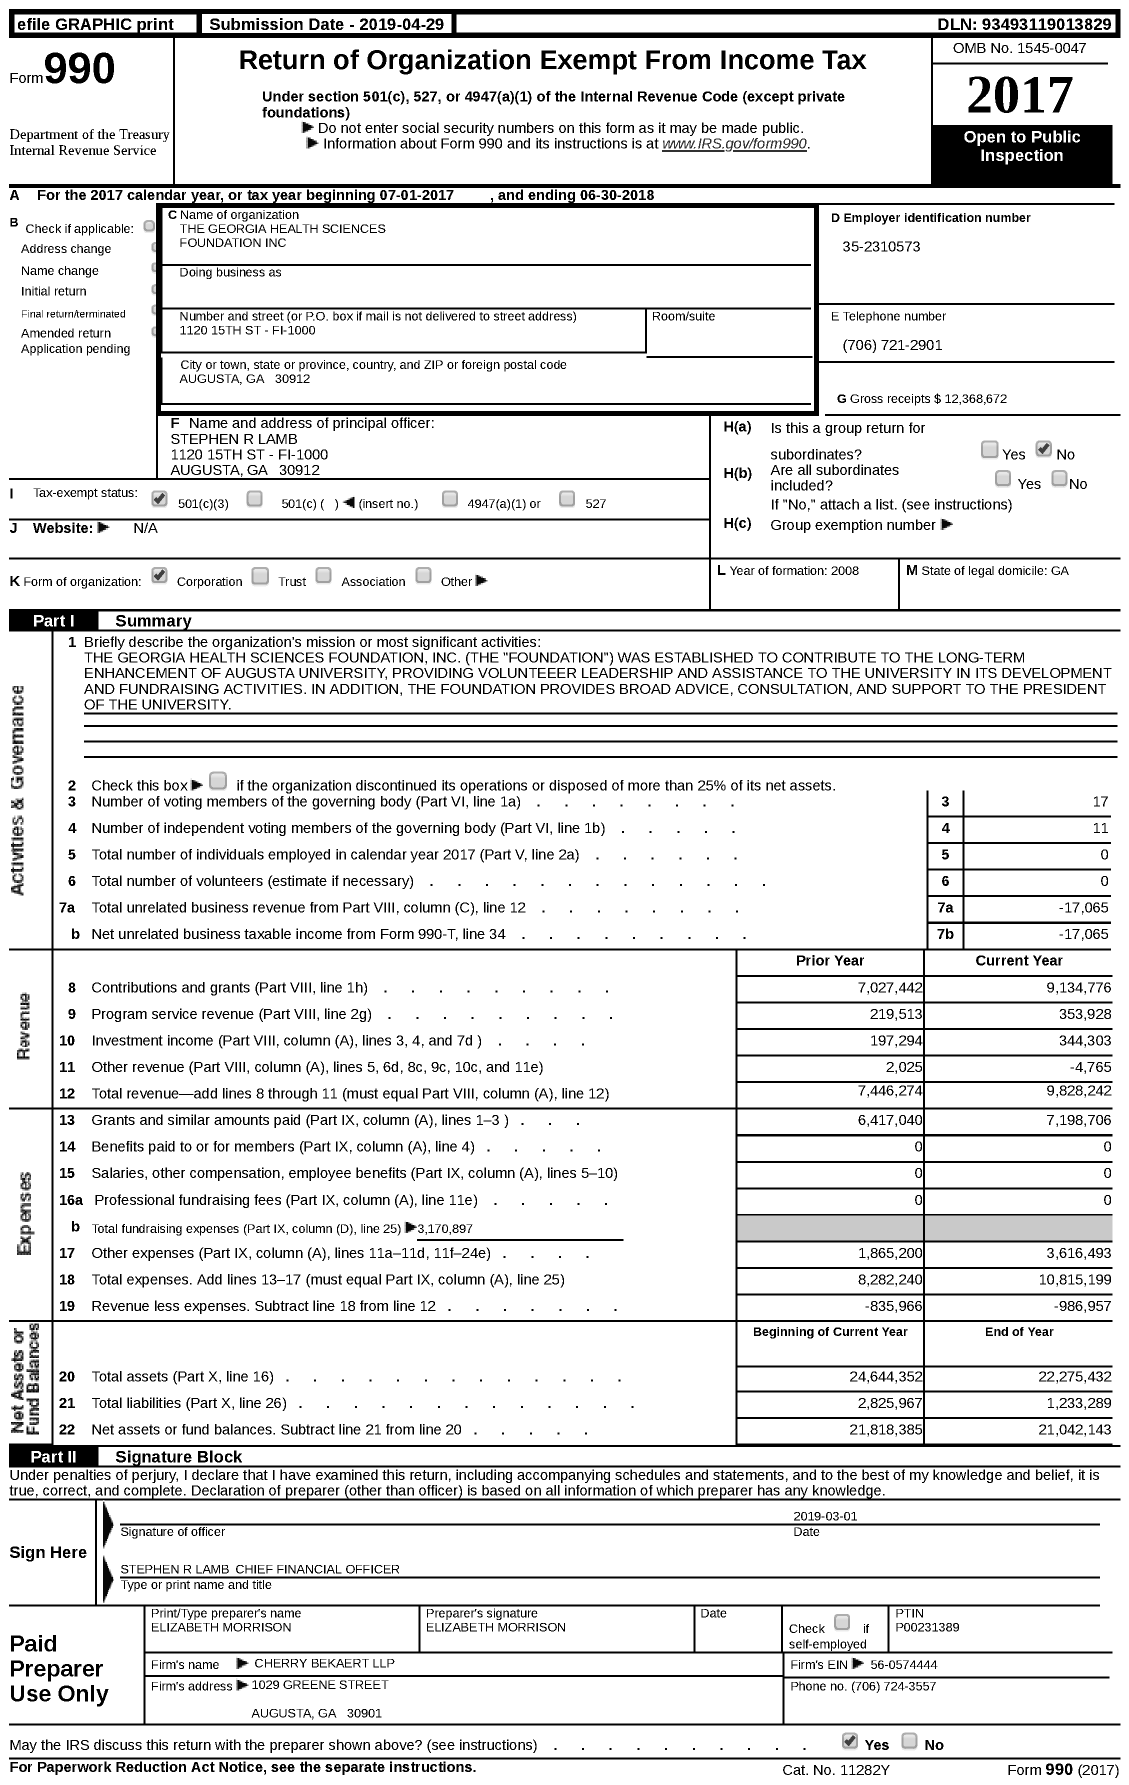 Image of first page of 2017 Form 990 for The Georgia Health Sciences Foundation